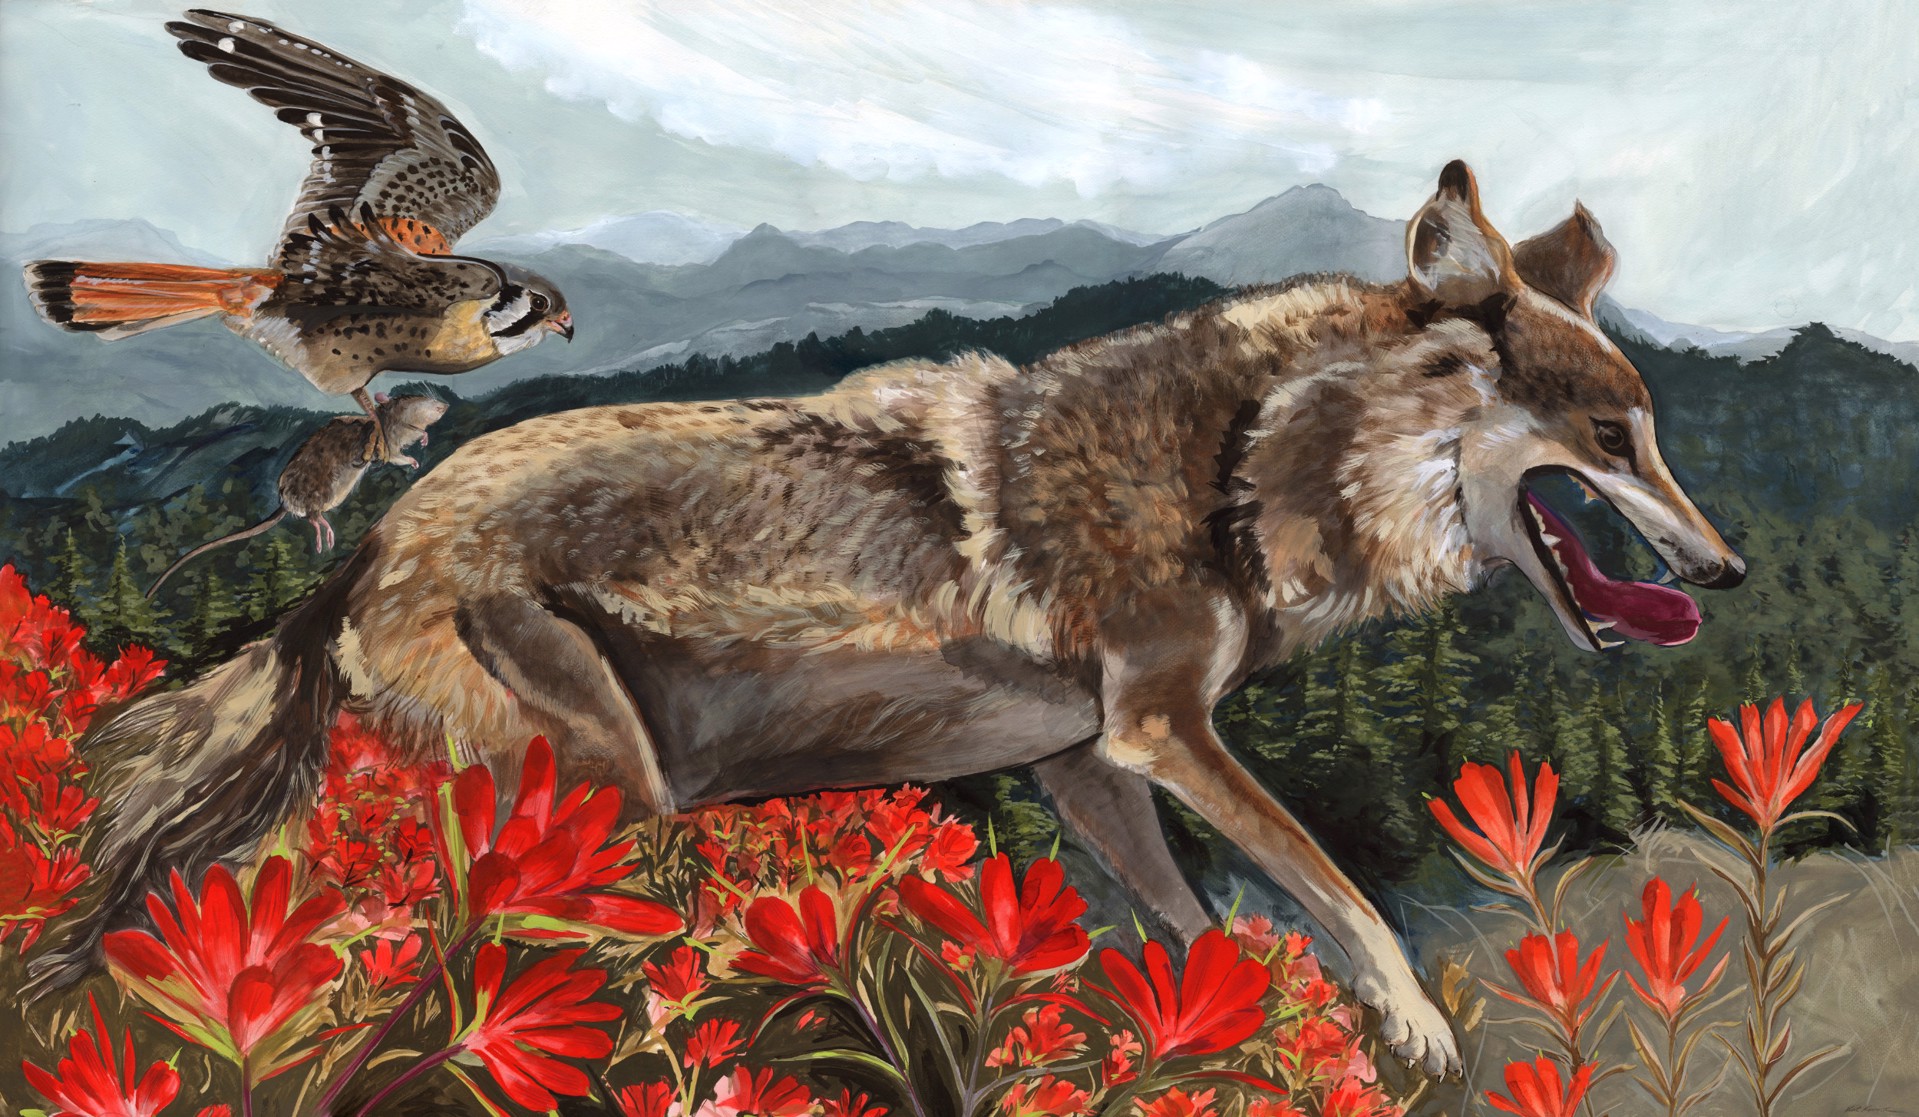 Beasts. Mexican Gray Wolf, Kestrel and Indian Paintbrush by Kat Kinnick